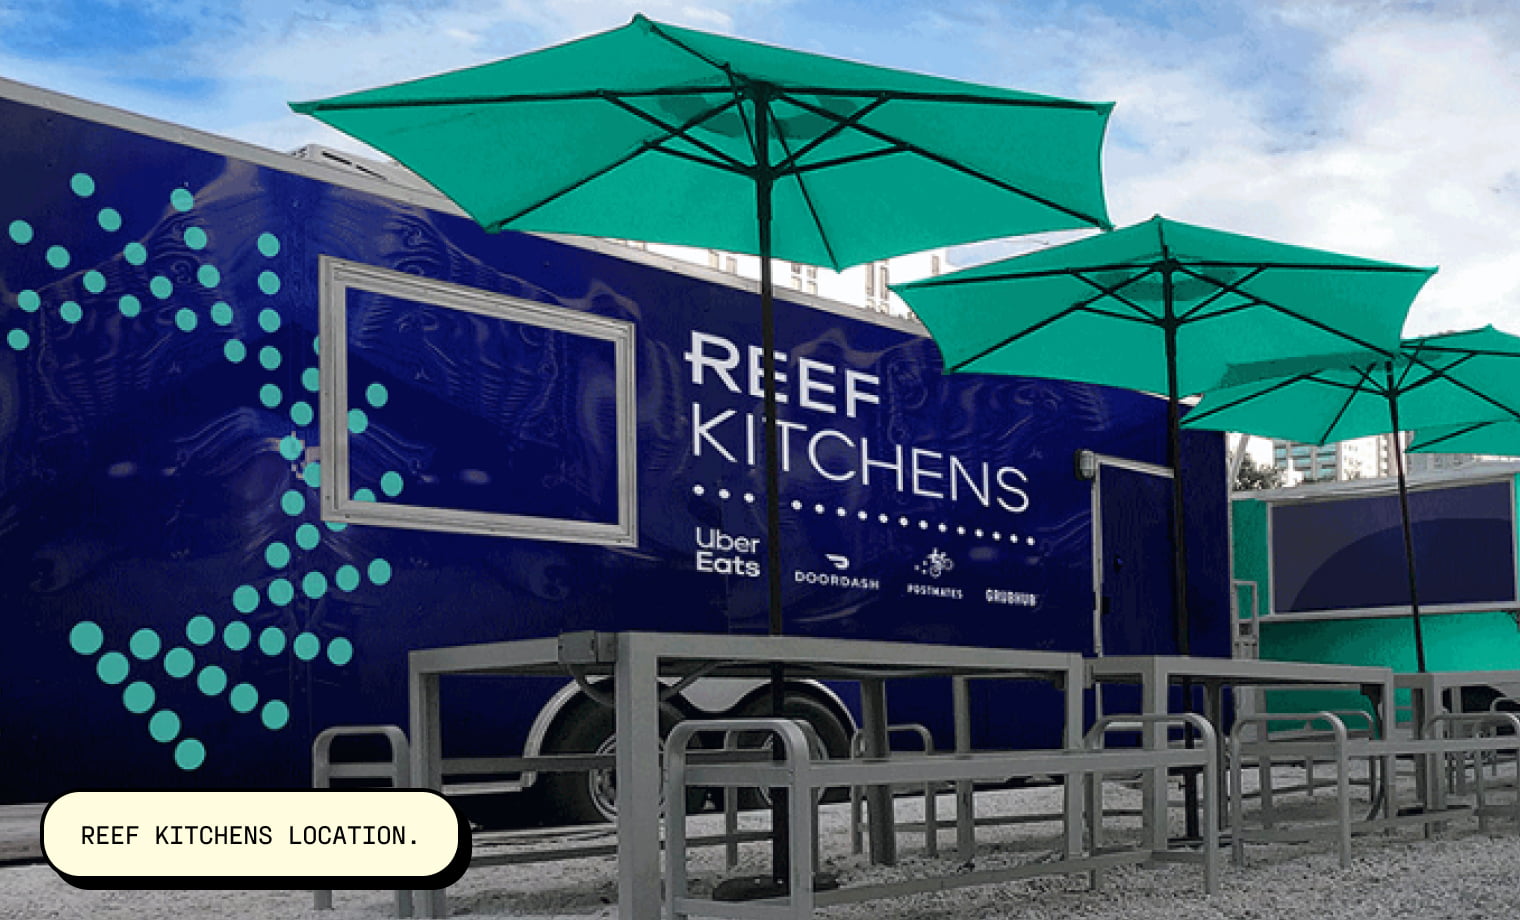 REEF Kitchens location. Image source: Restaurant Business